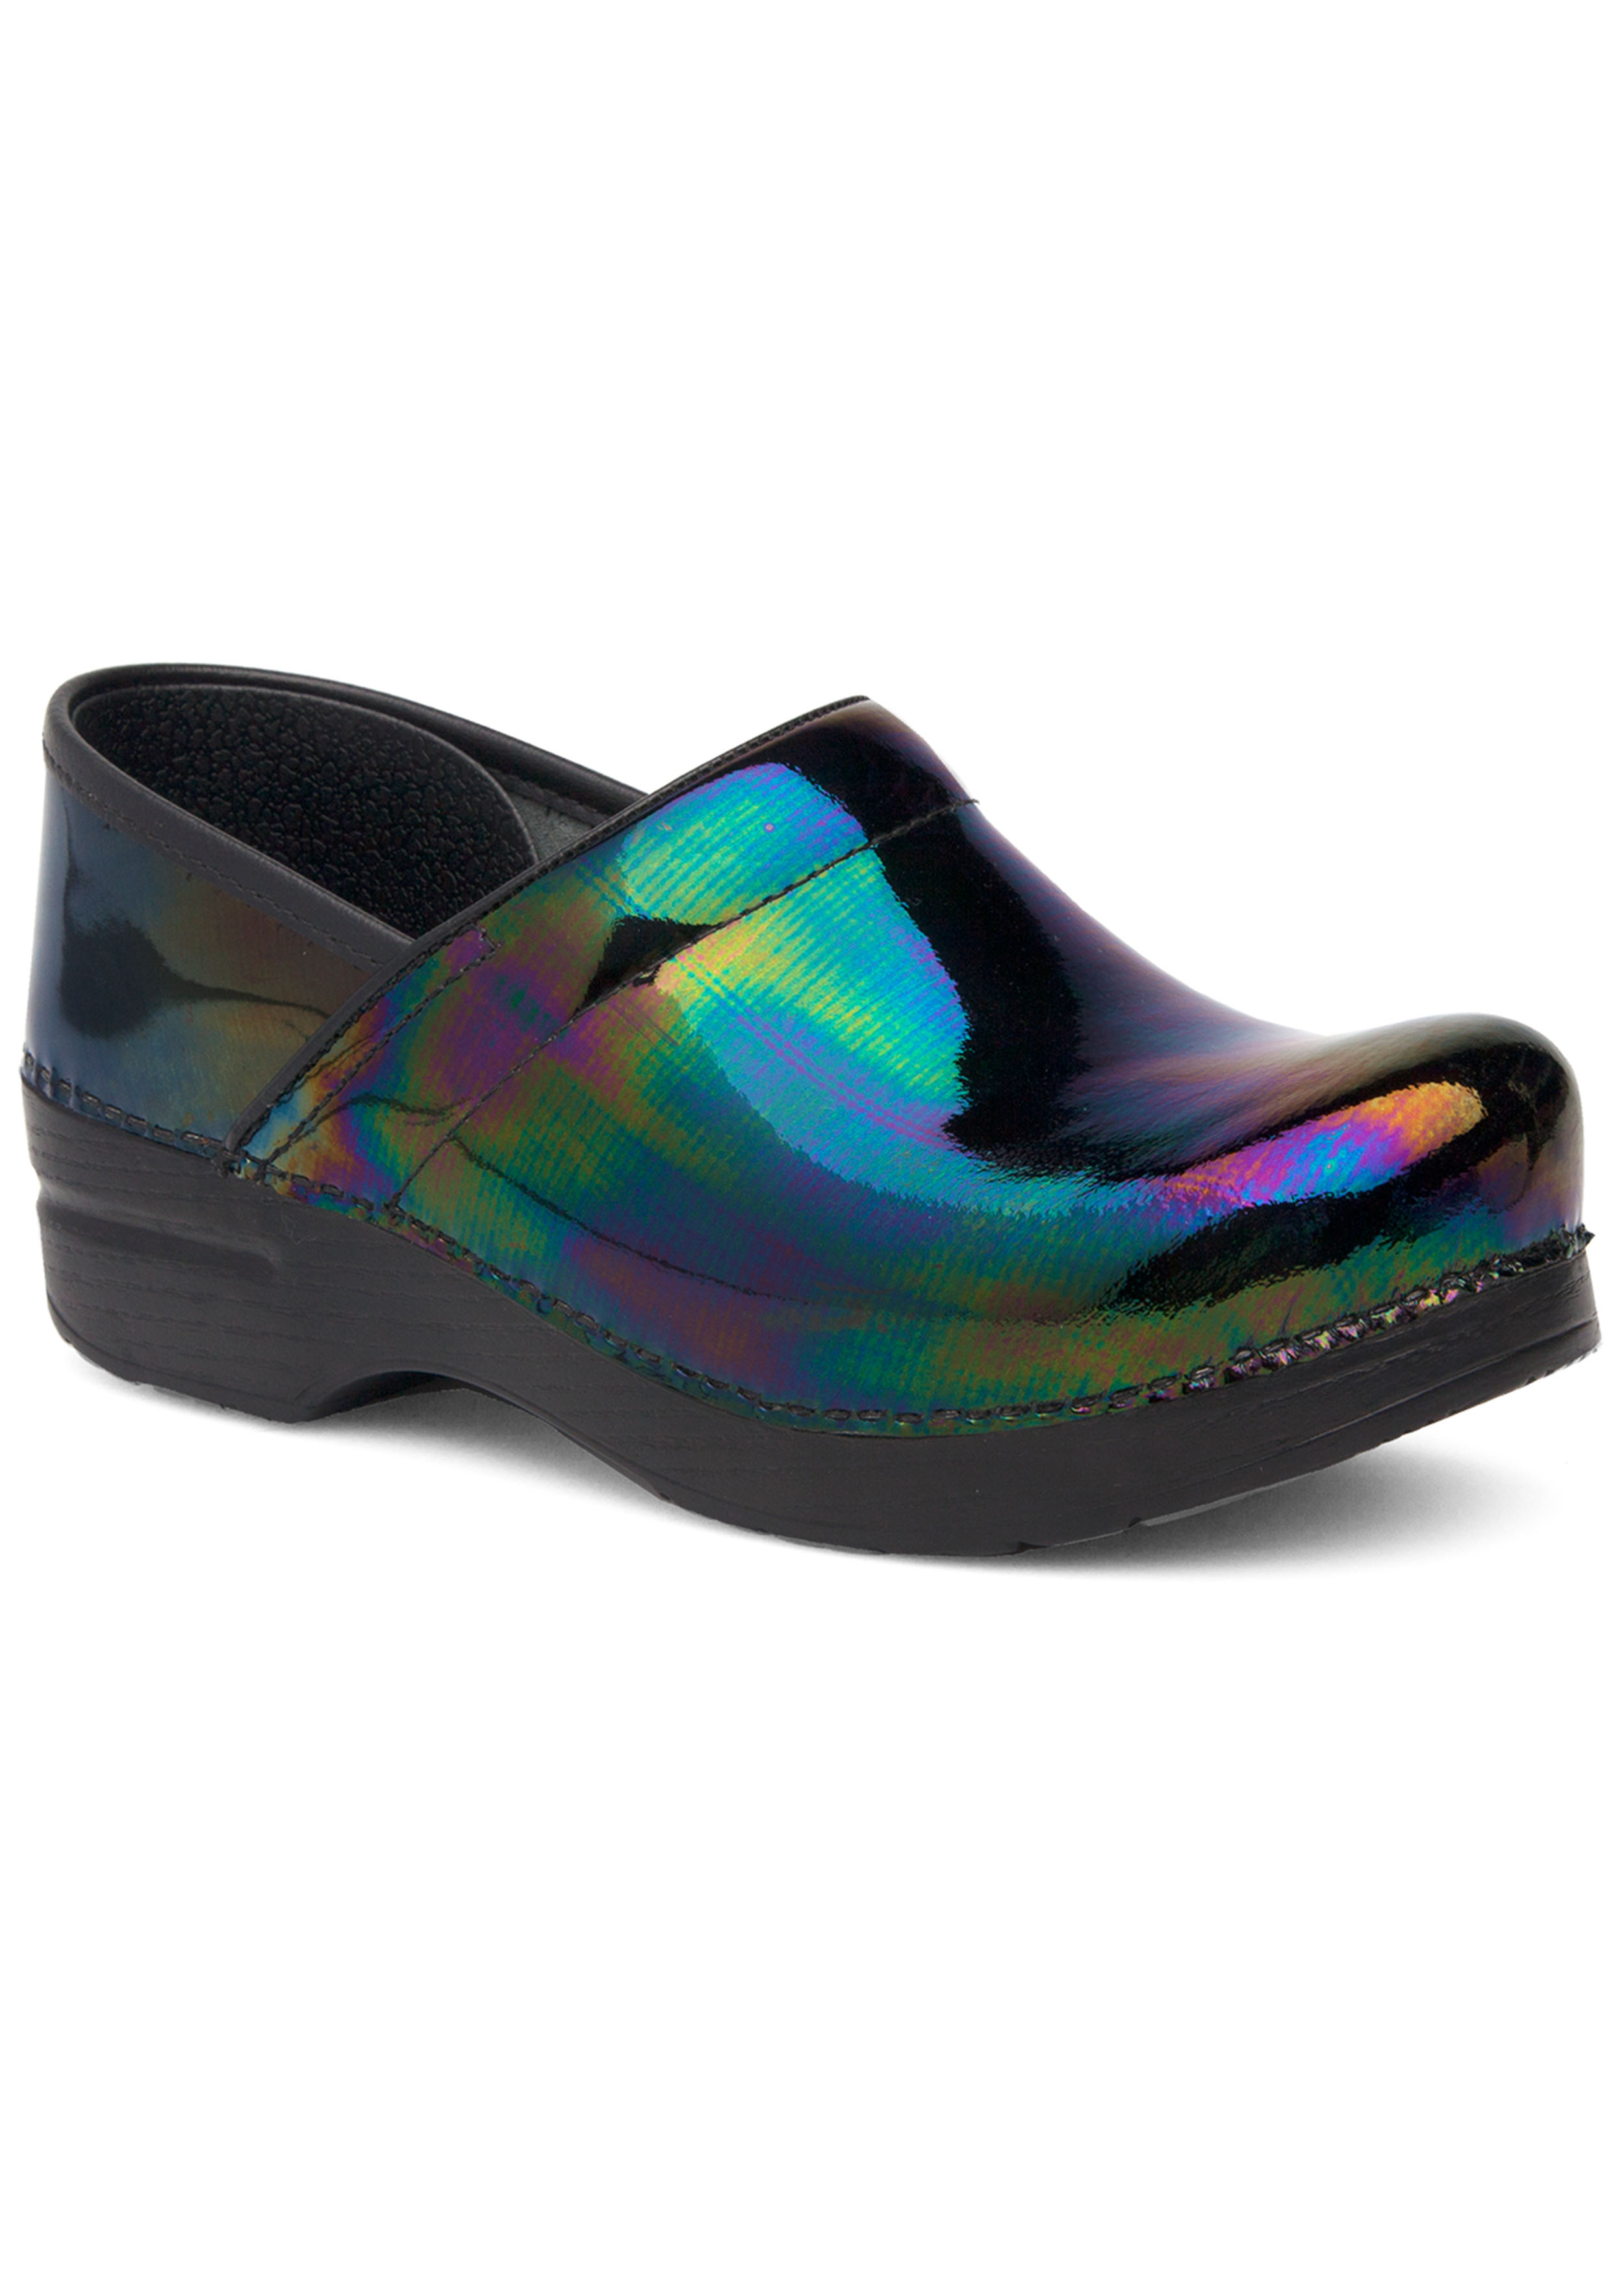 Dansko 39 Womens Professional Clogs Multicolor Colorful Streamers Patent  Leather